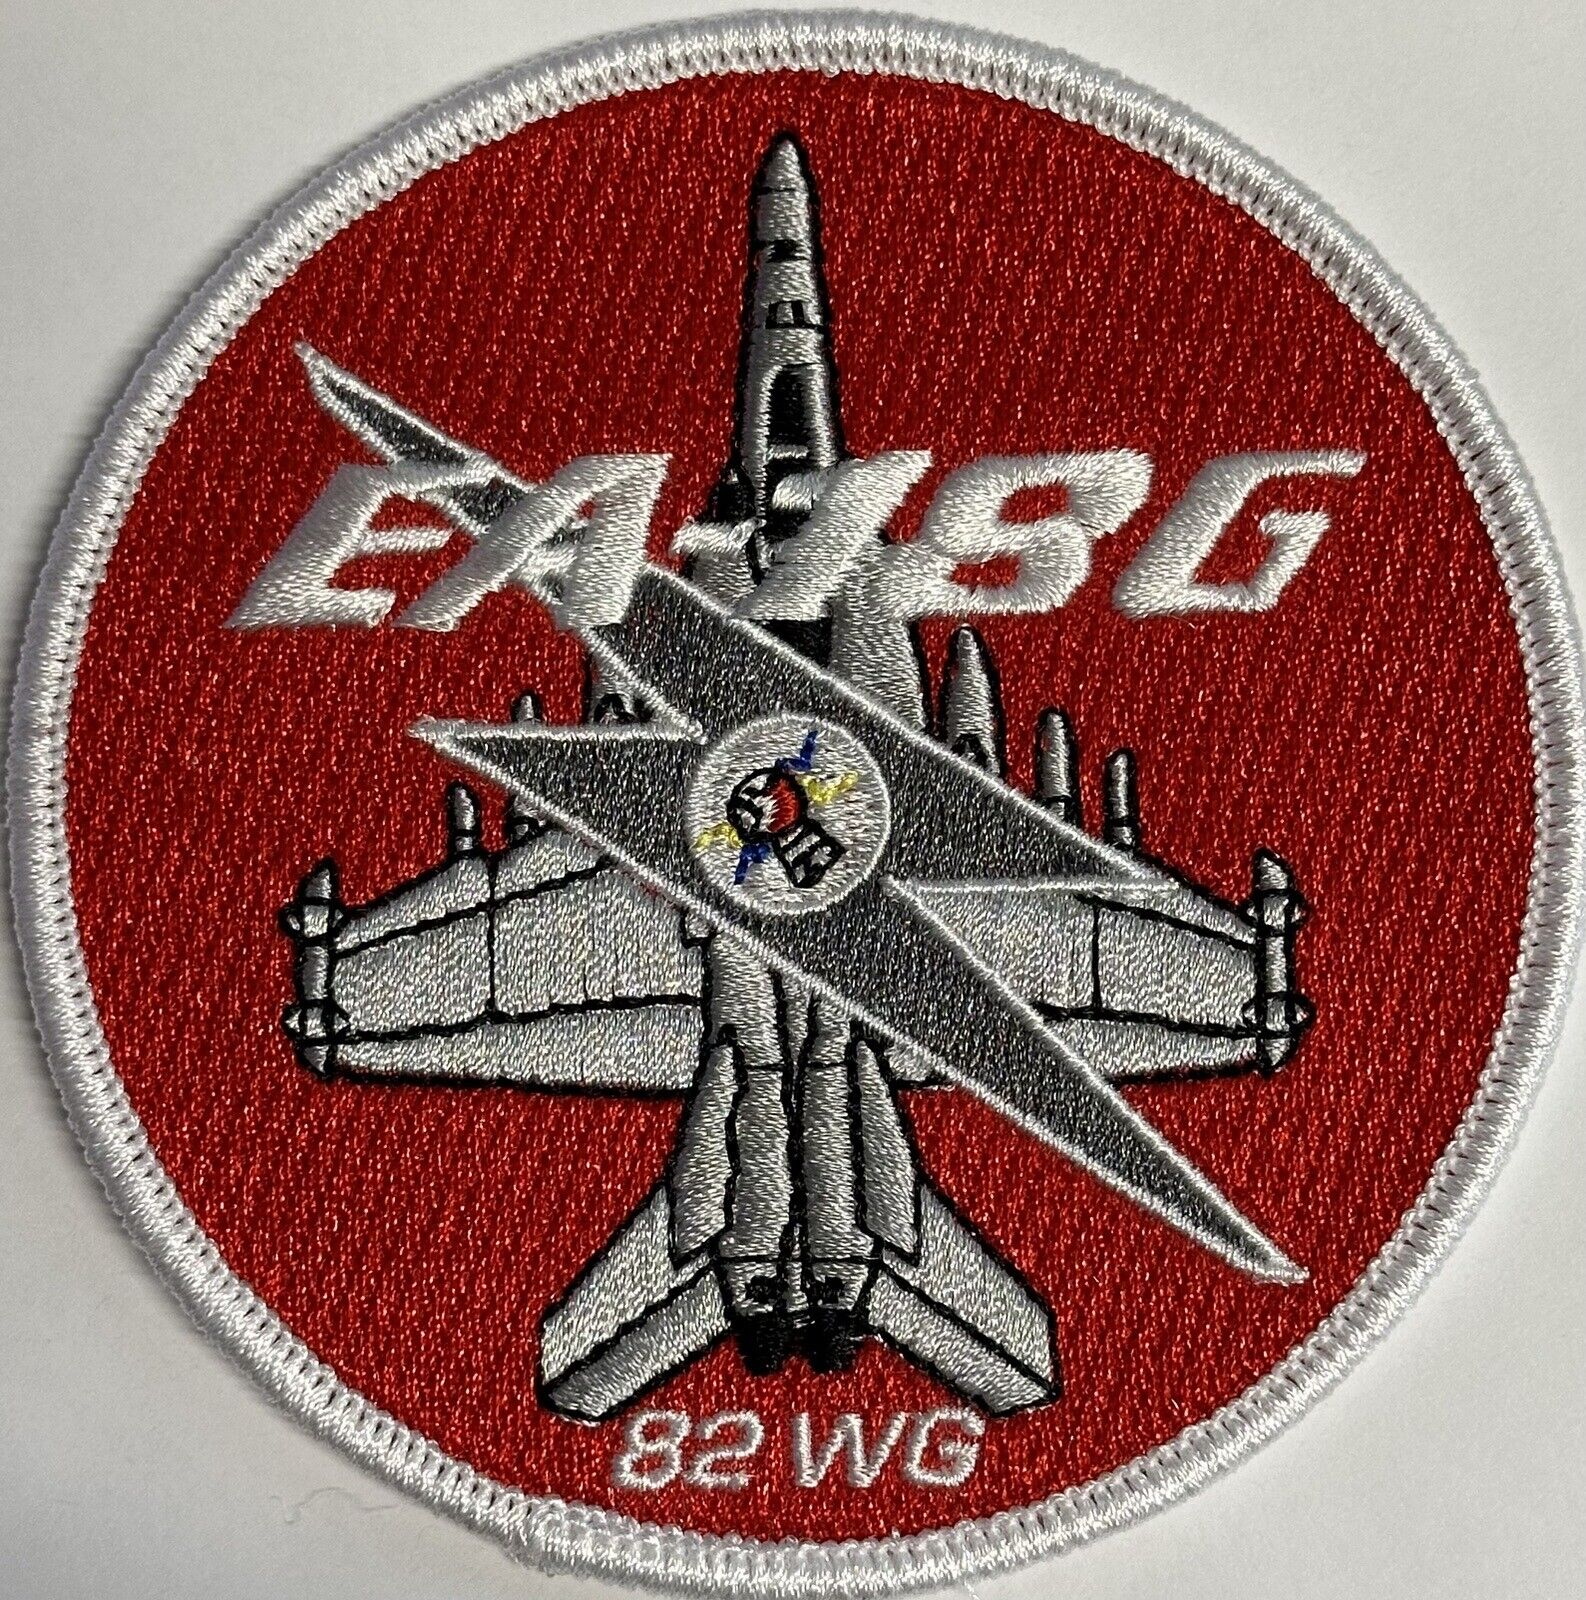 EA-18G Growler 82 Wing RAAF Air Force Australia Embroidered Patch